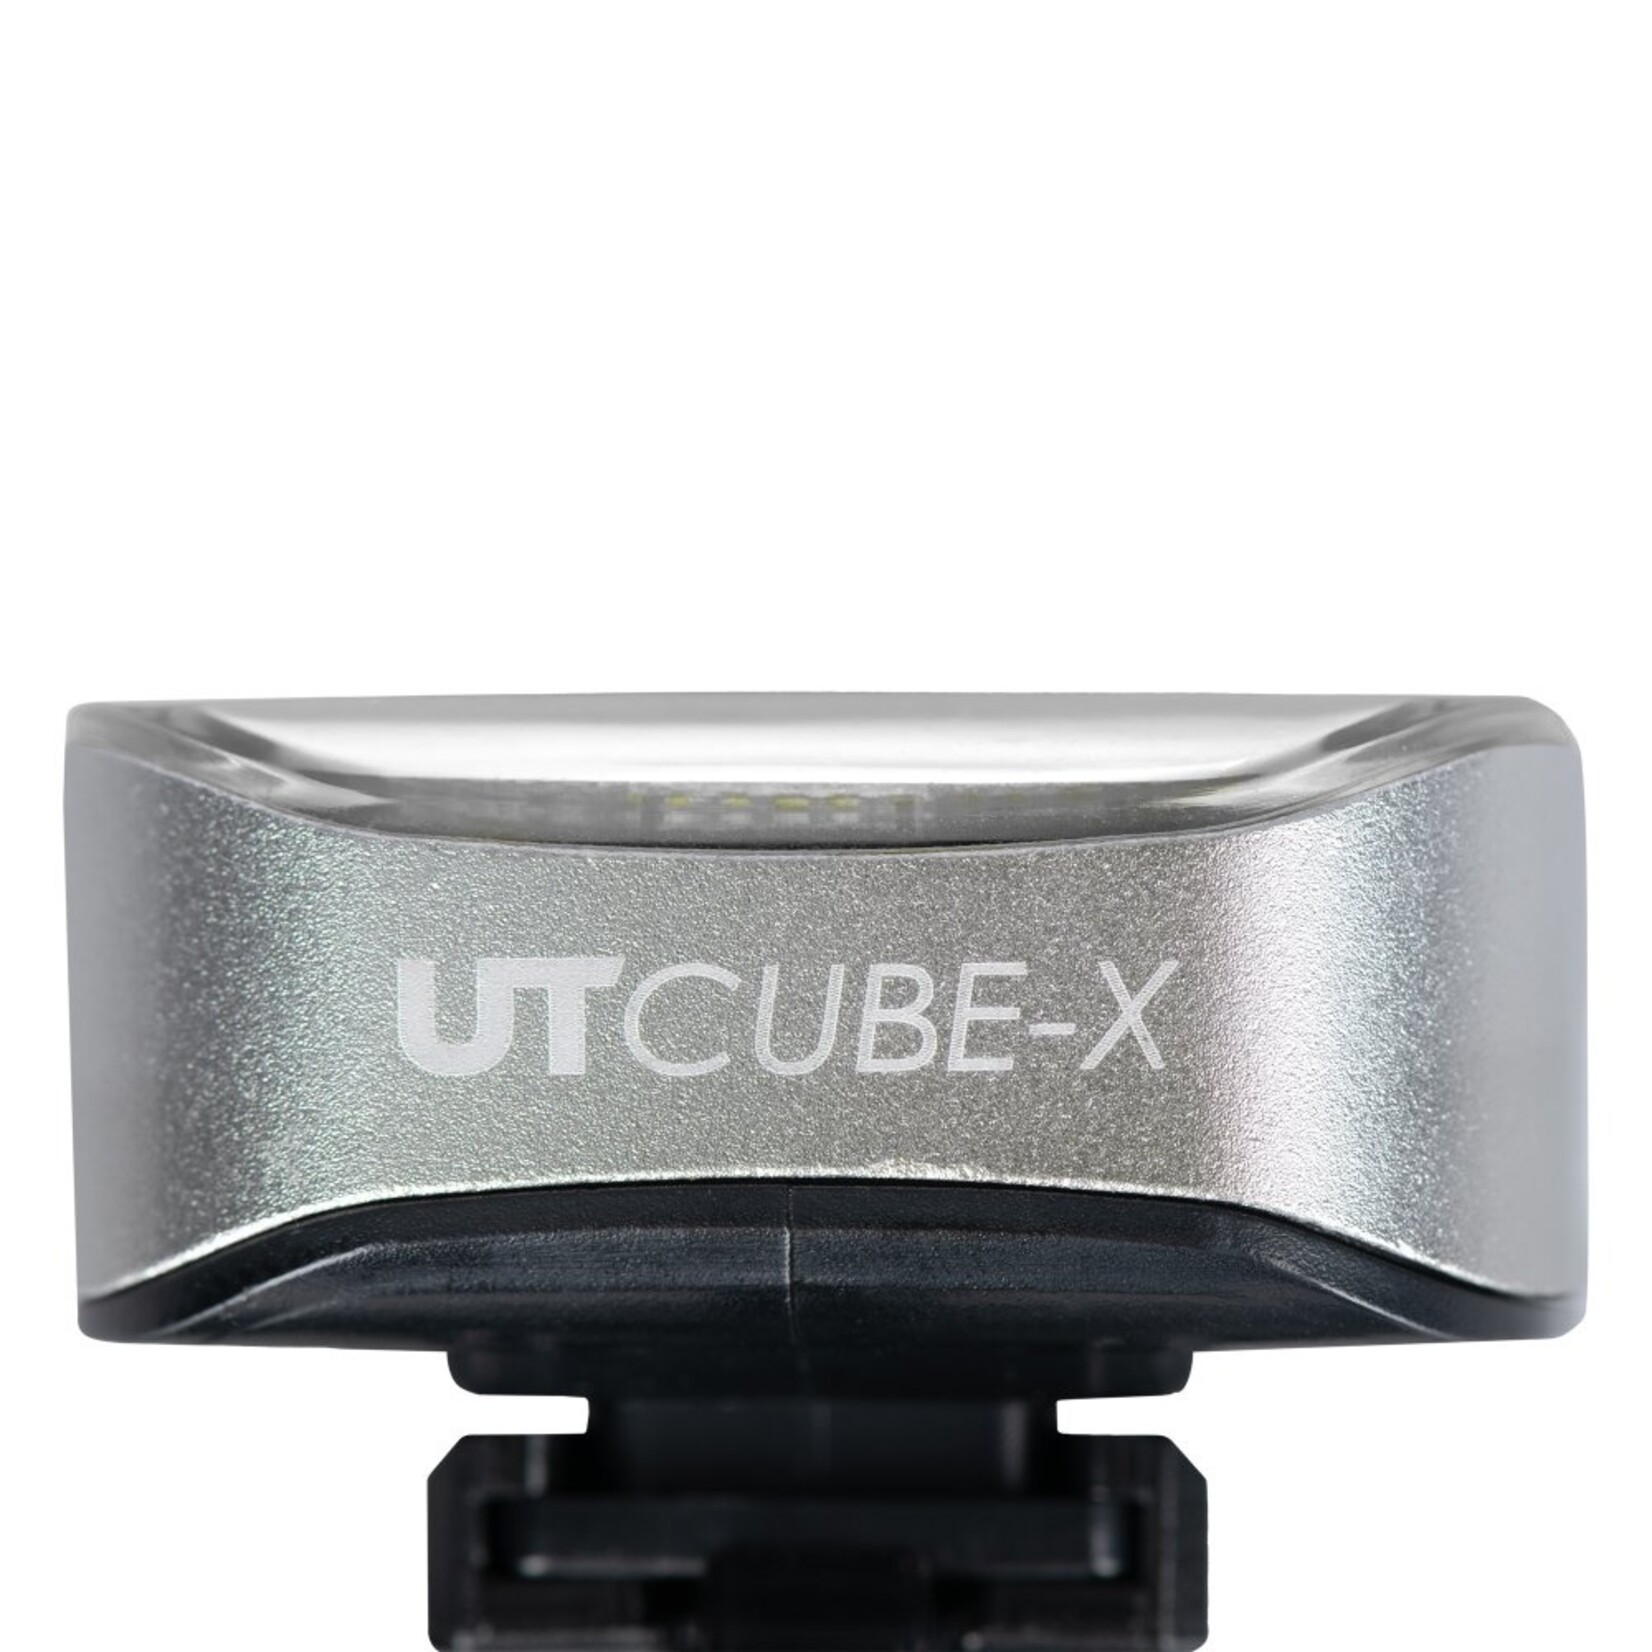 Oxford Oxford Ultratorch Cube-X F75 75LM Front Light